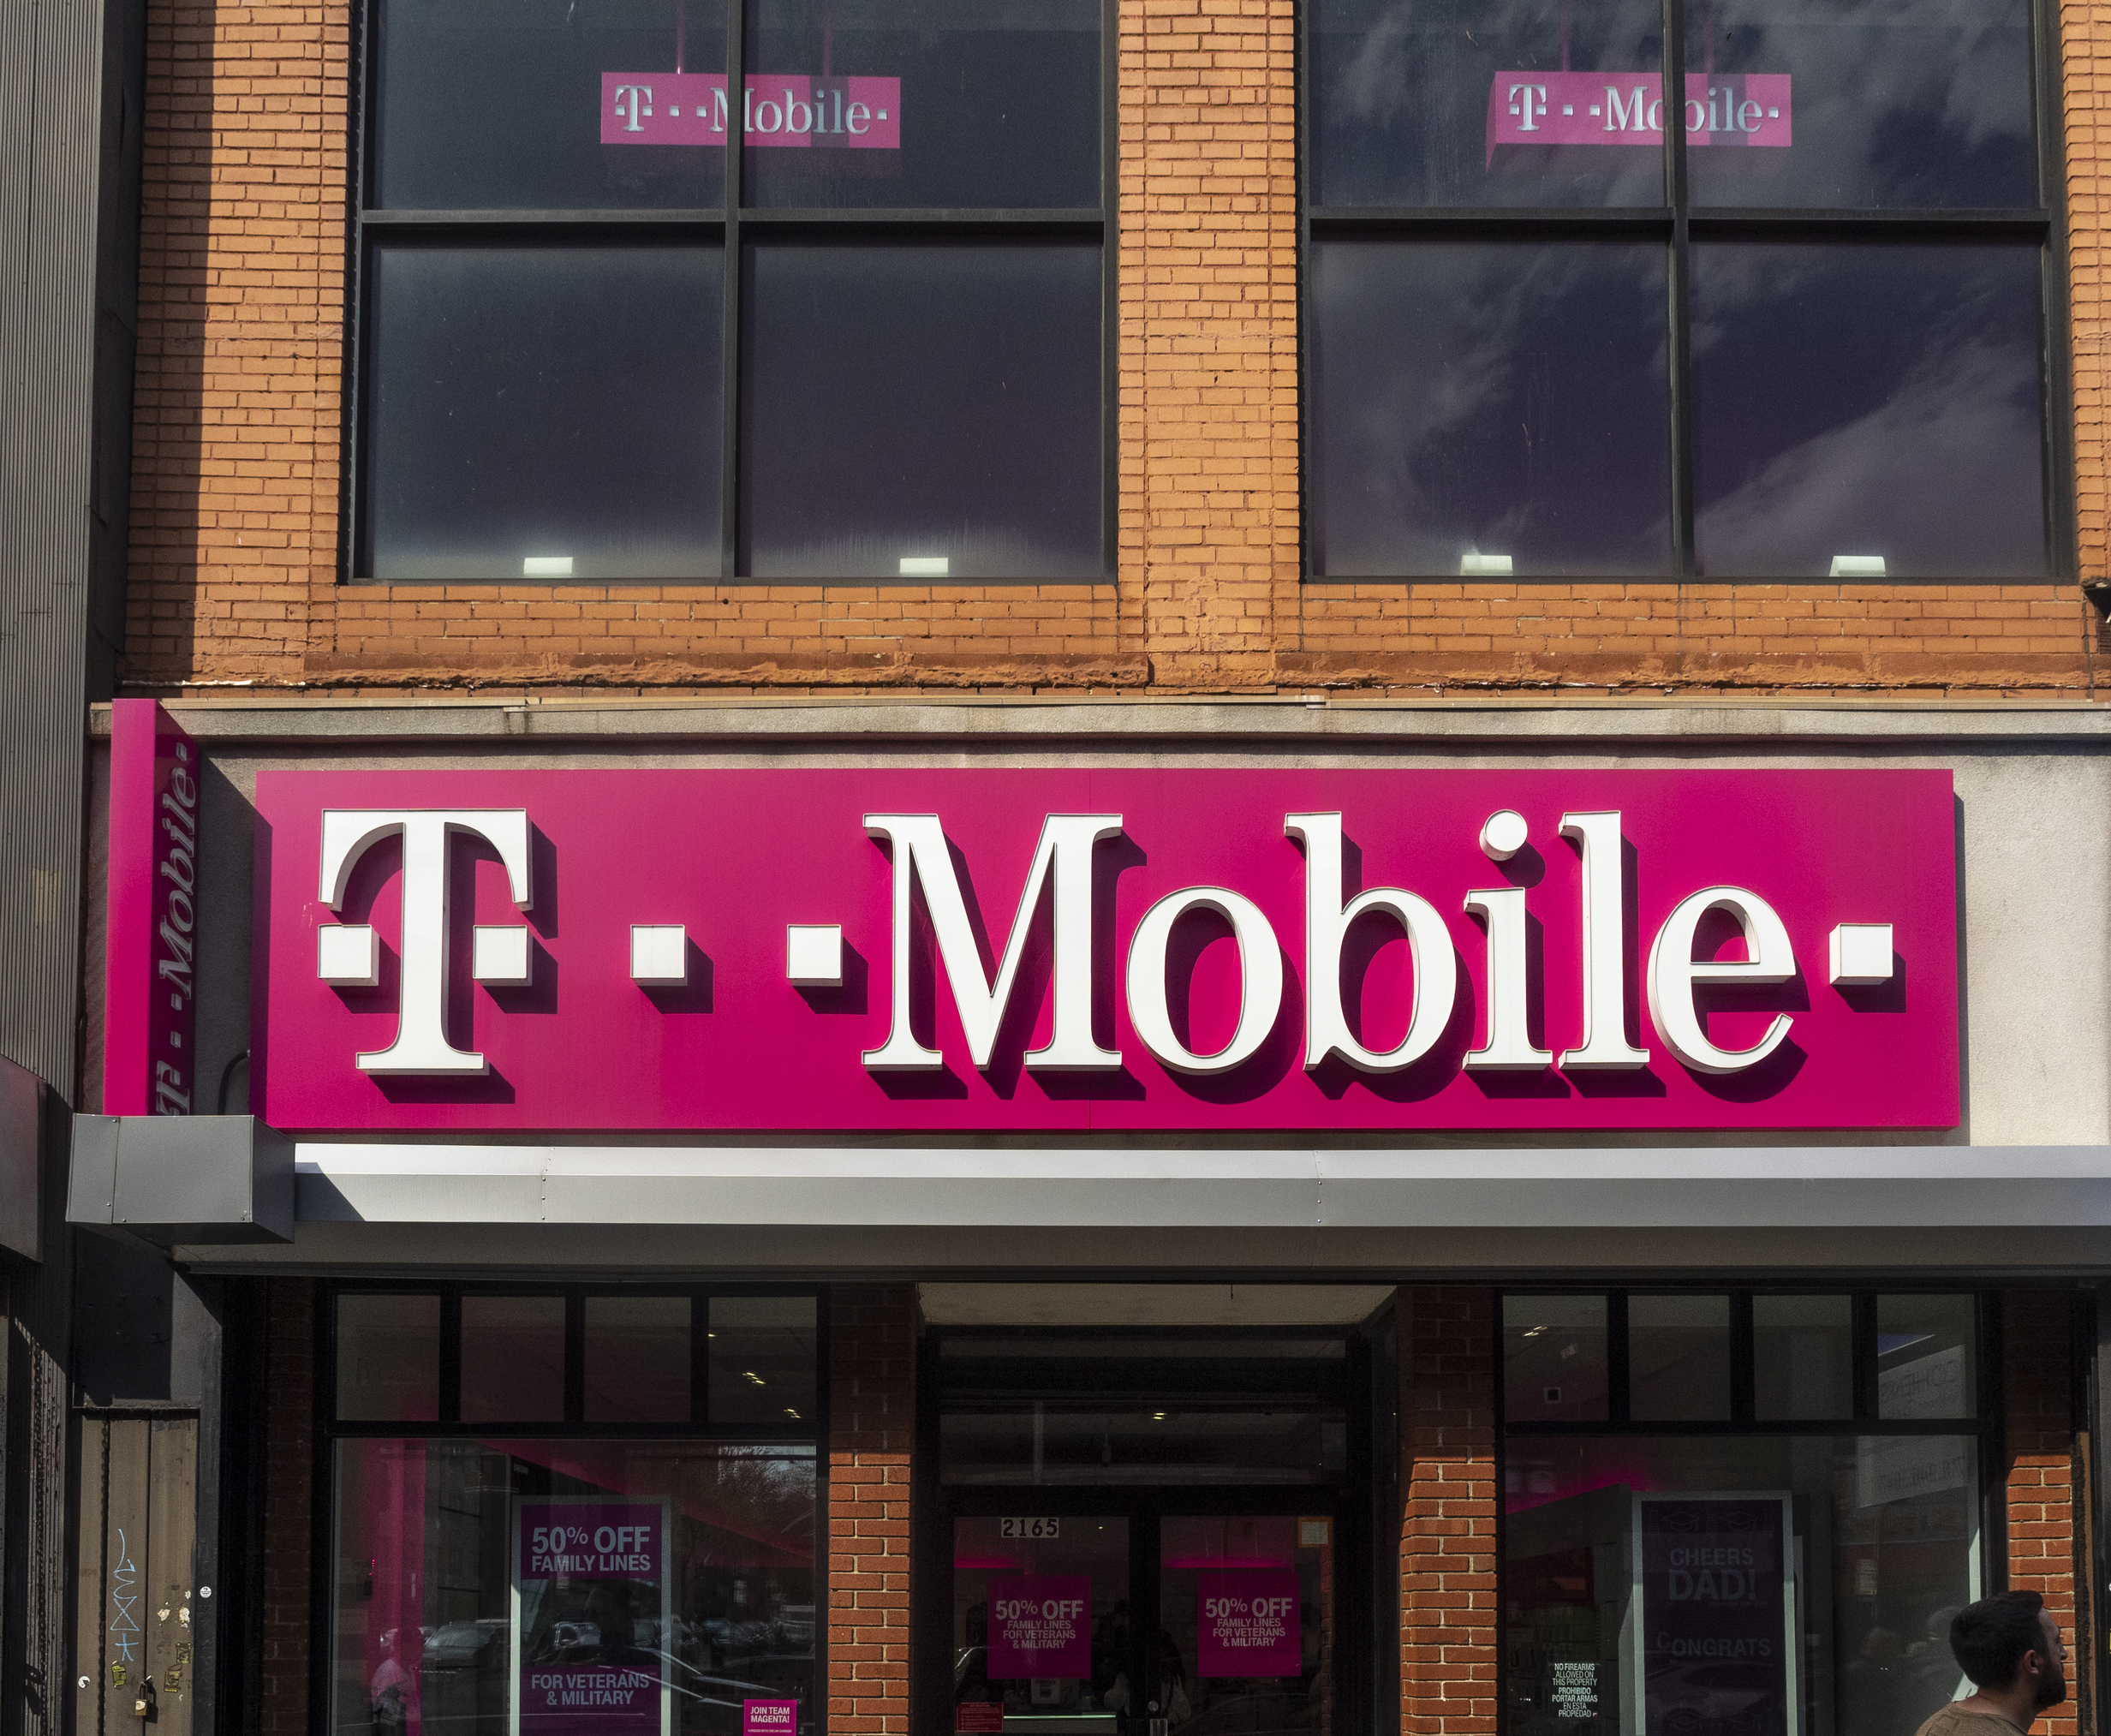 T-Mobile offers 50% off family lines for first responders